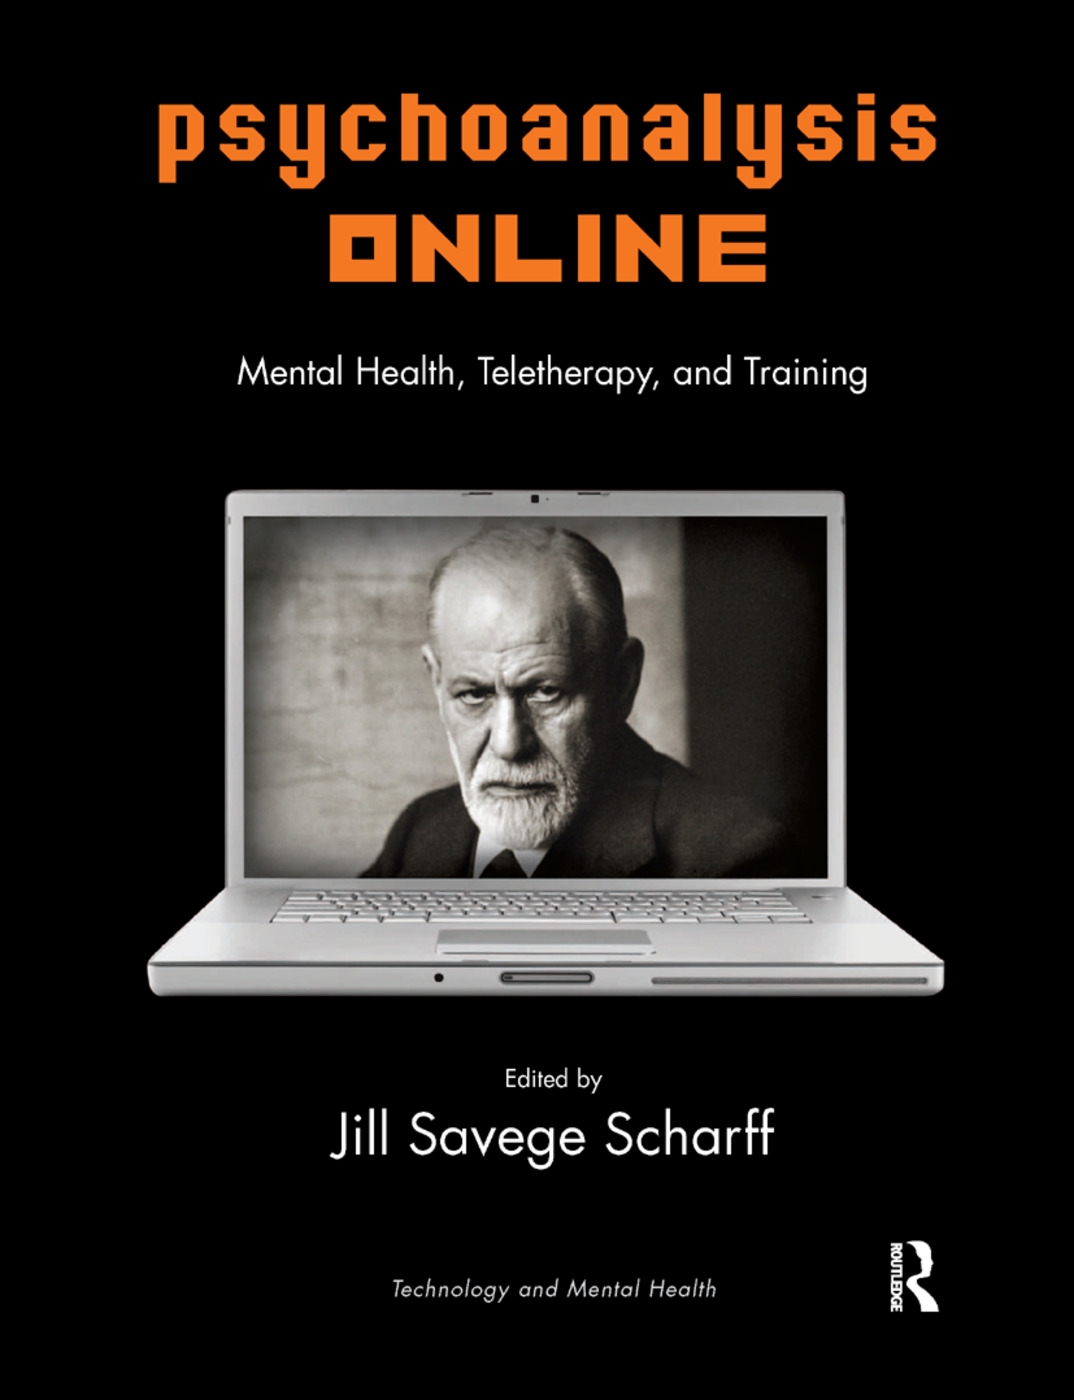 Psychoanalysis Online: Mental Health, Teletherapy and Training